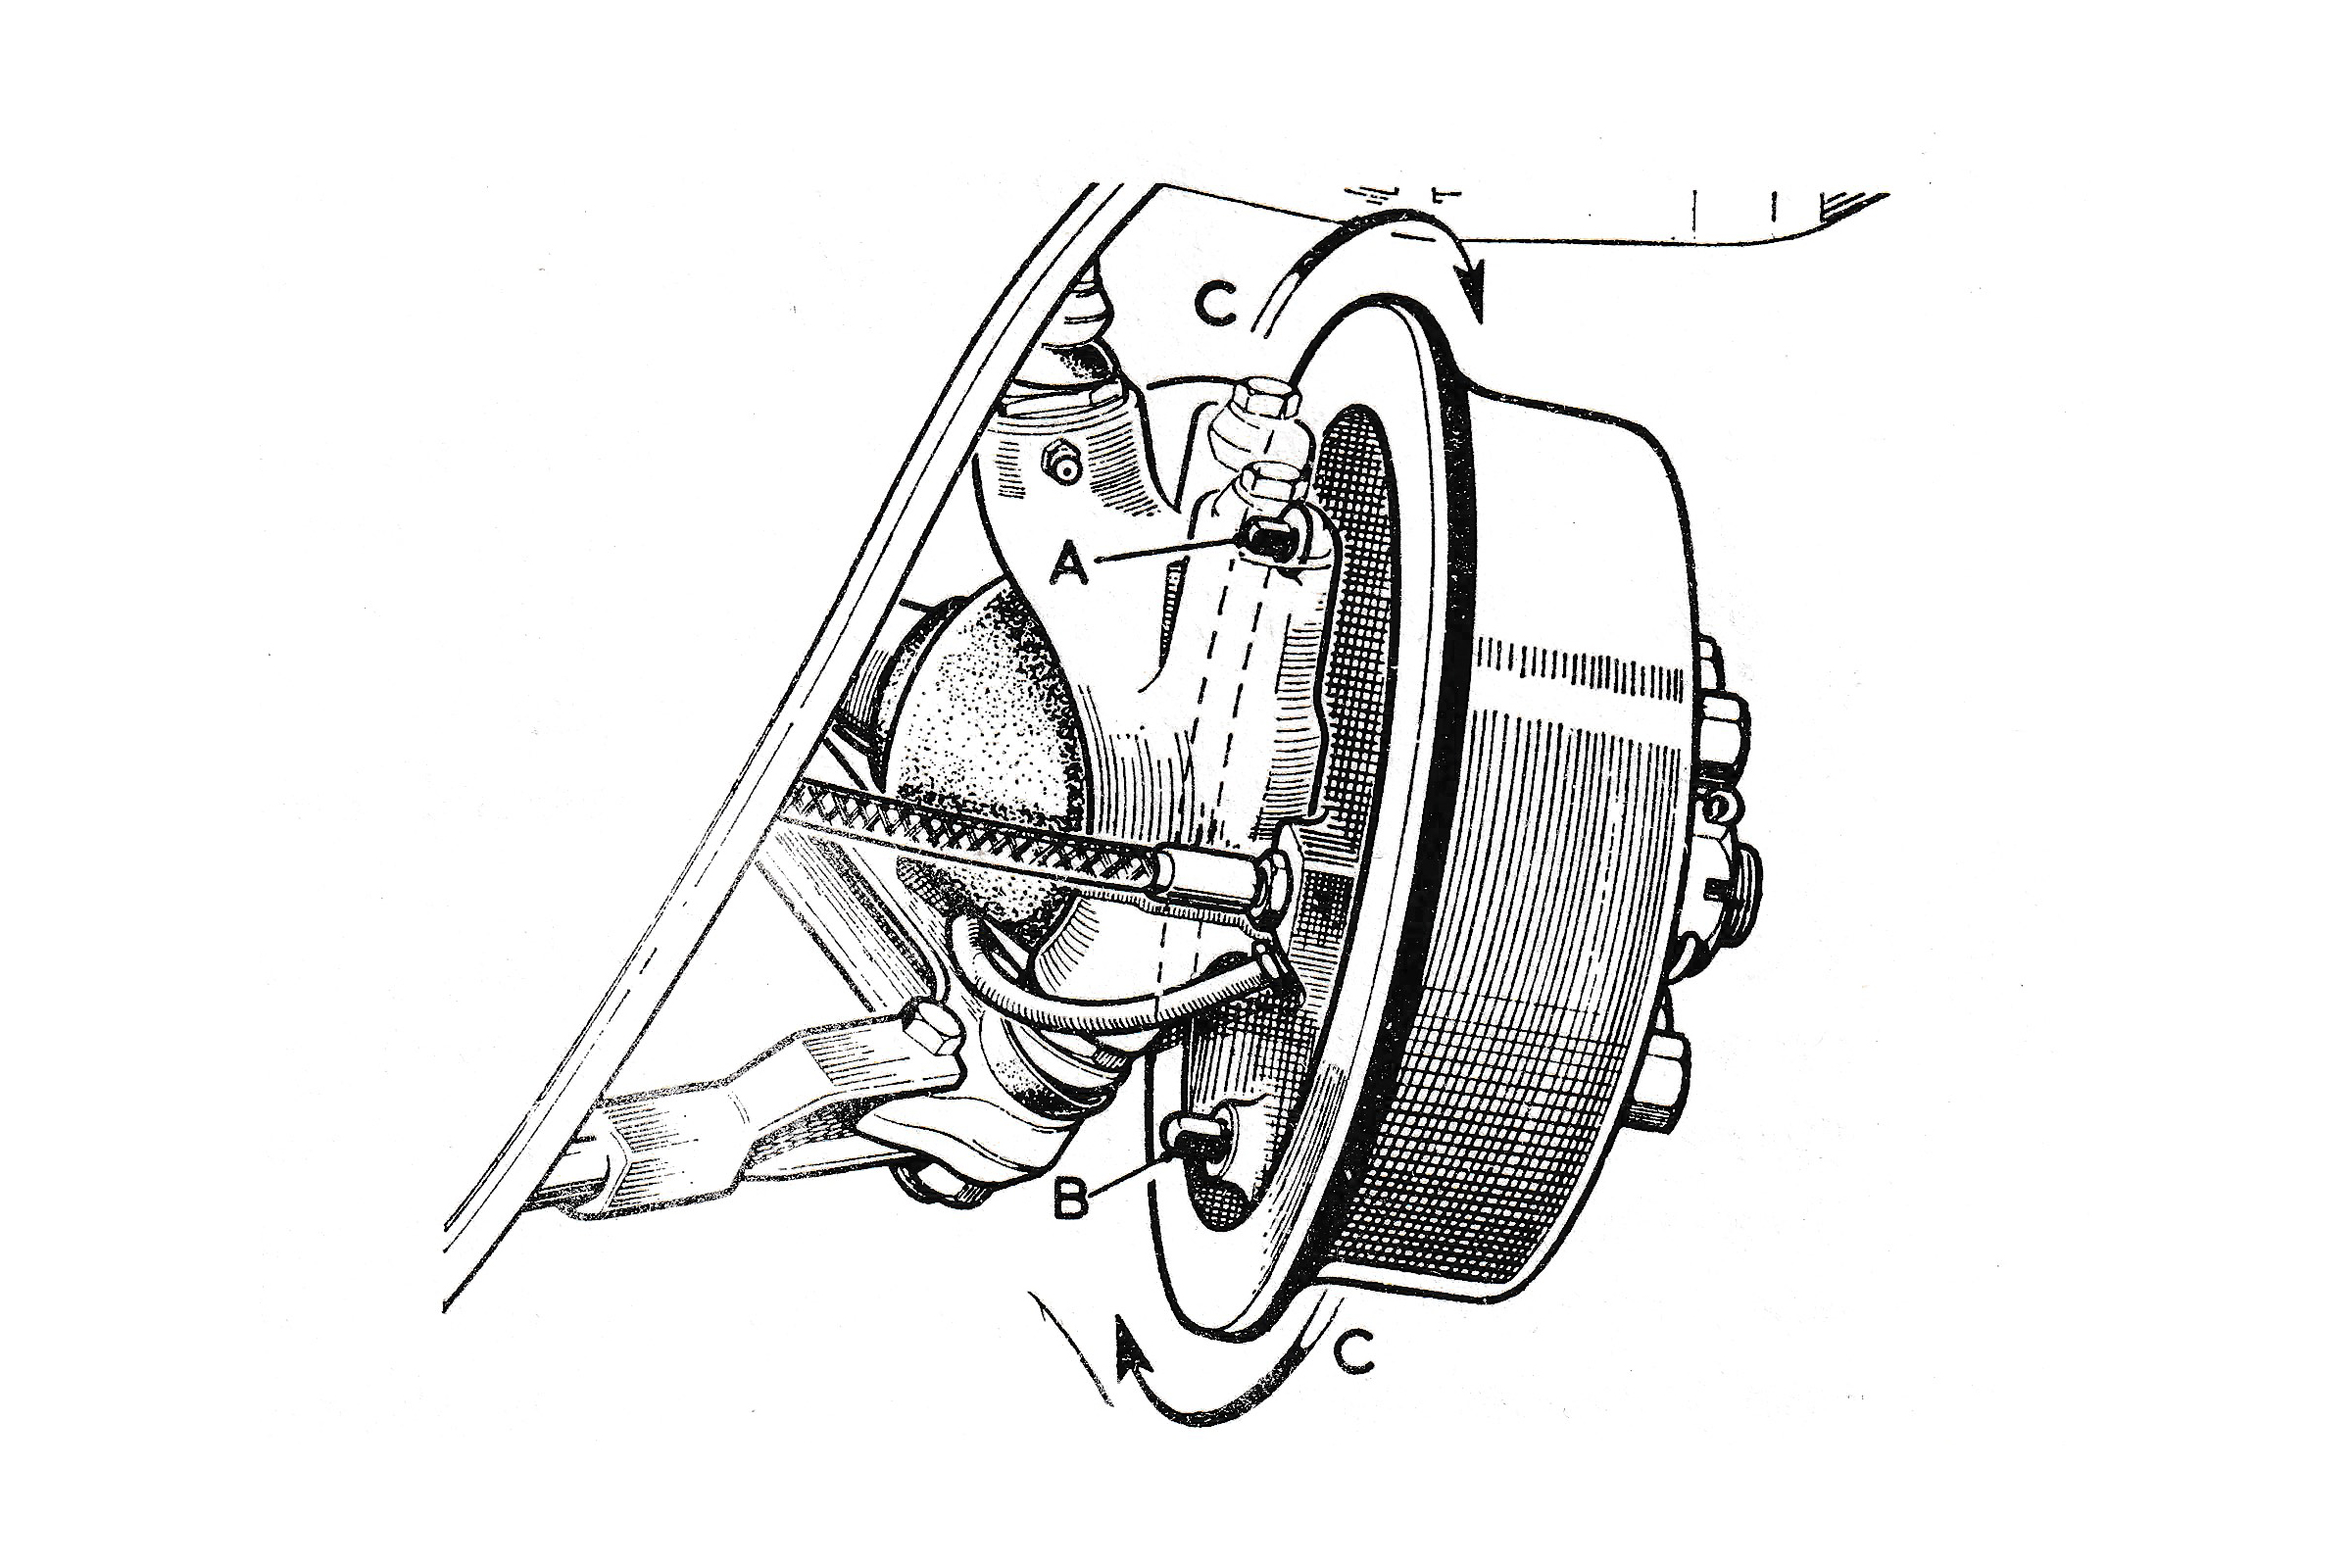 On Eli' and Hornet models with twin leading shoe on the front wheels, two adjusters 'A' and 'B' are provided. To tighten the brakes turn the adjusters clockwise 'C'